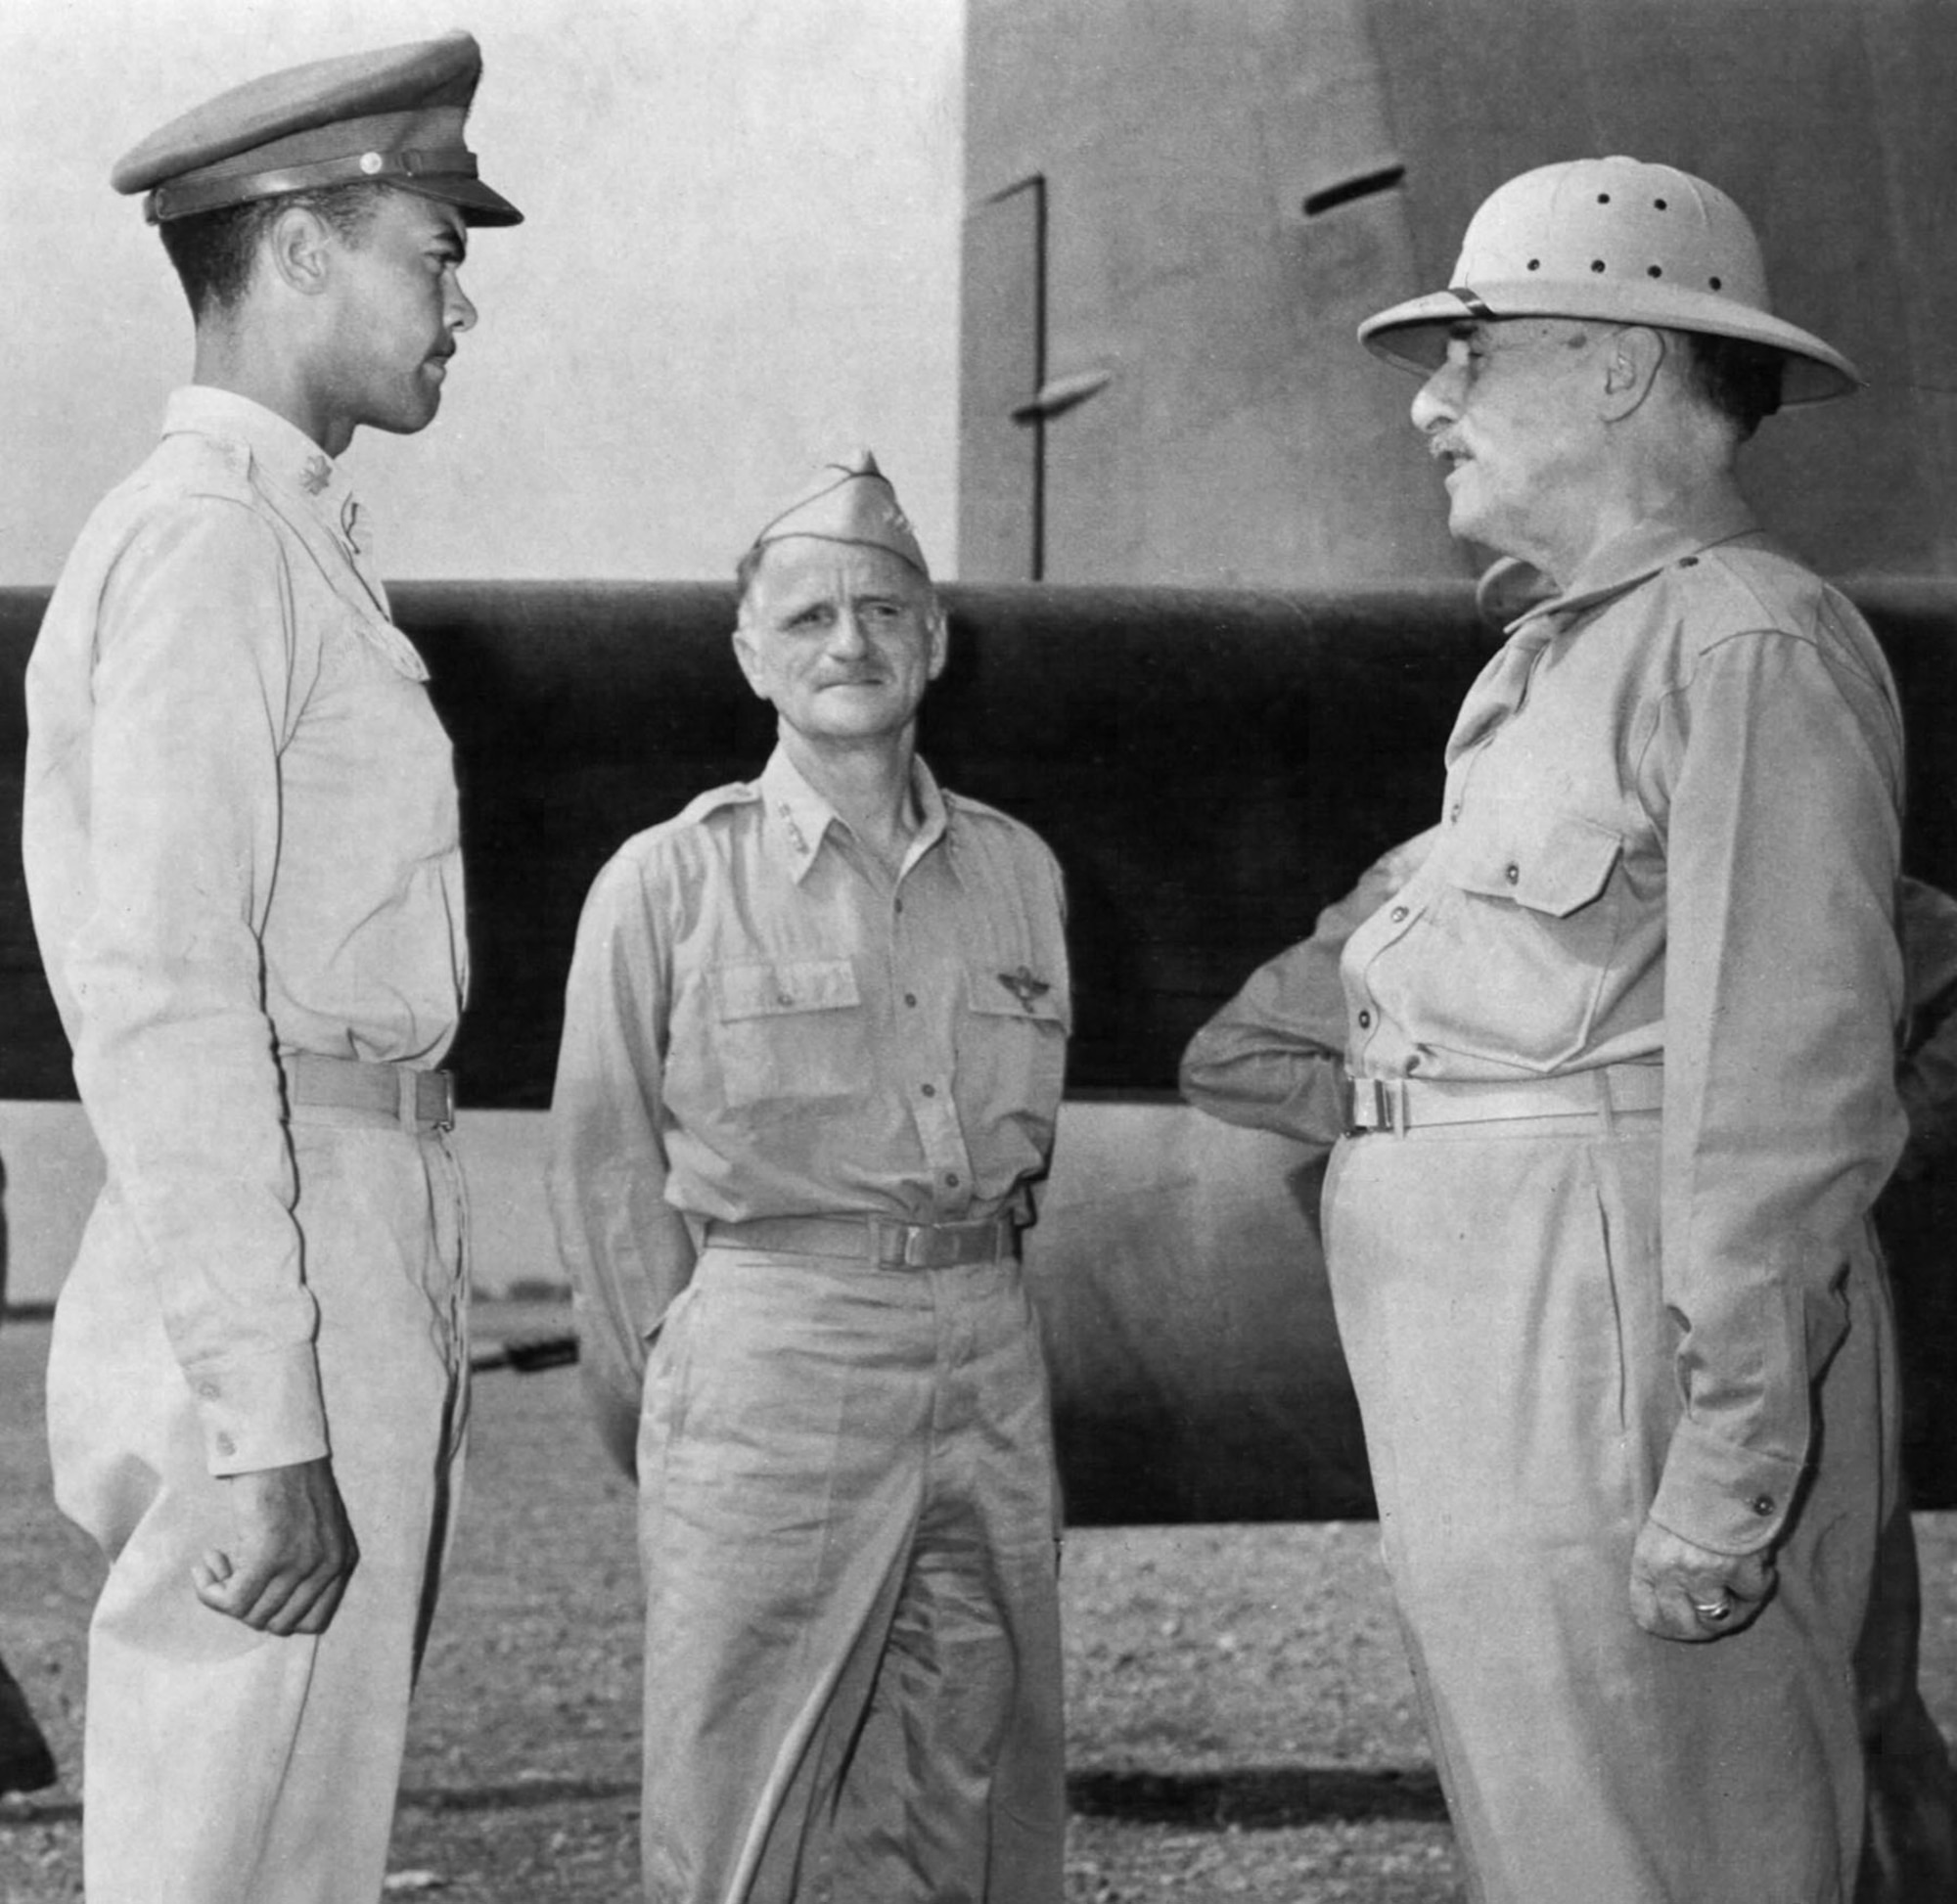 Throughout the war, the Tuskegee Airmen remained under the watchful eye of superiors in the War Department and the U.S. Army. Here, 99th commander Lt. Col. Benjamin Davis (left) meets with Secretary of War Henry Stimson (right) in Tunis as Lt. Gen. Carl Spaatz, commander of the Mediterranean Allied Air Forces watches. (U.S. Air Force photo)